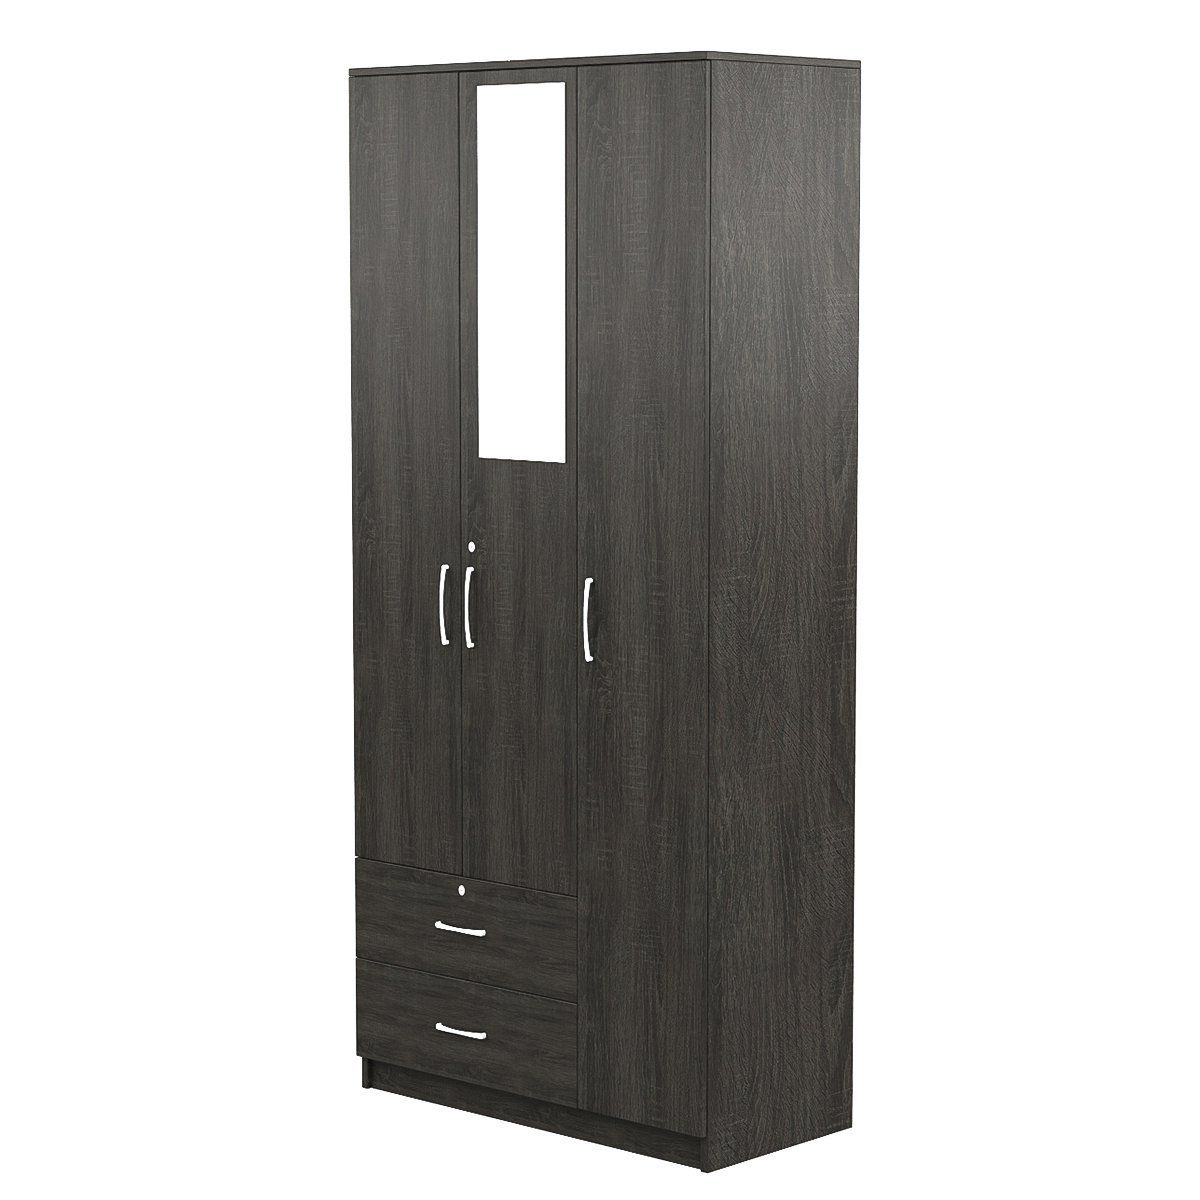 Newest Wardrobe: Buy Bedroom Wardrobes Online At Best Prices In India Throughout Metal Wardrobes (View 13 of 15)